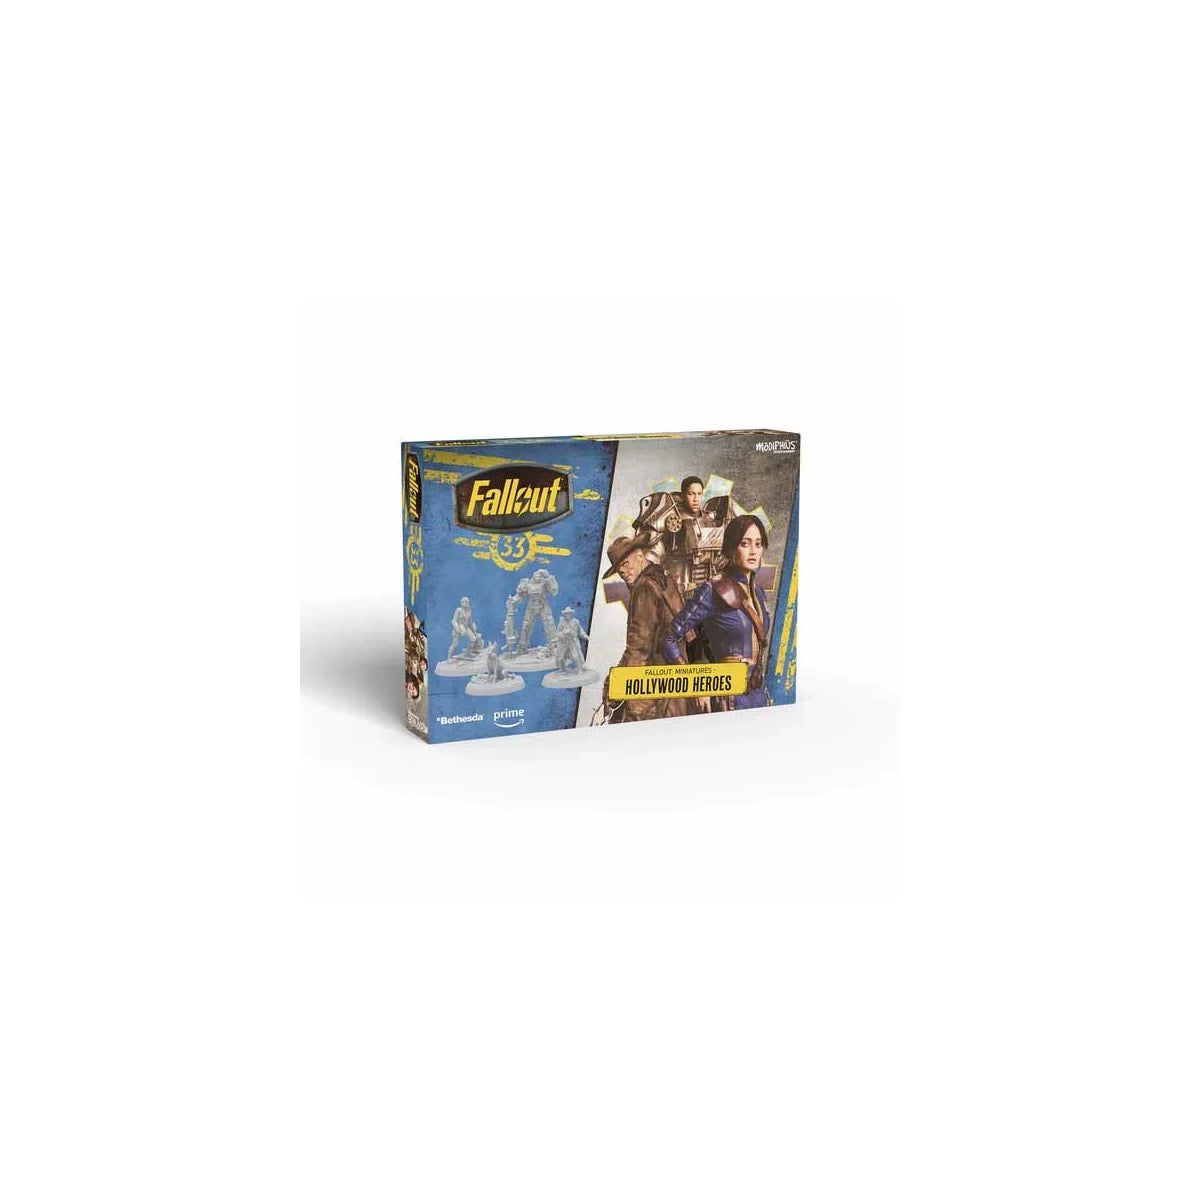 Preorder -  Name	Fallout: Miniatures - LA Tales (Amazon TV Show Tie-in)